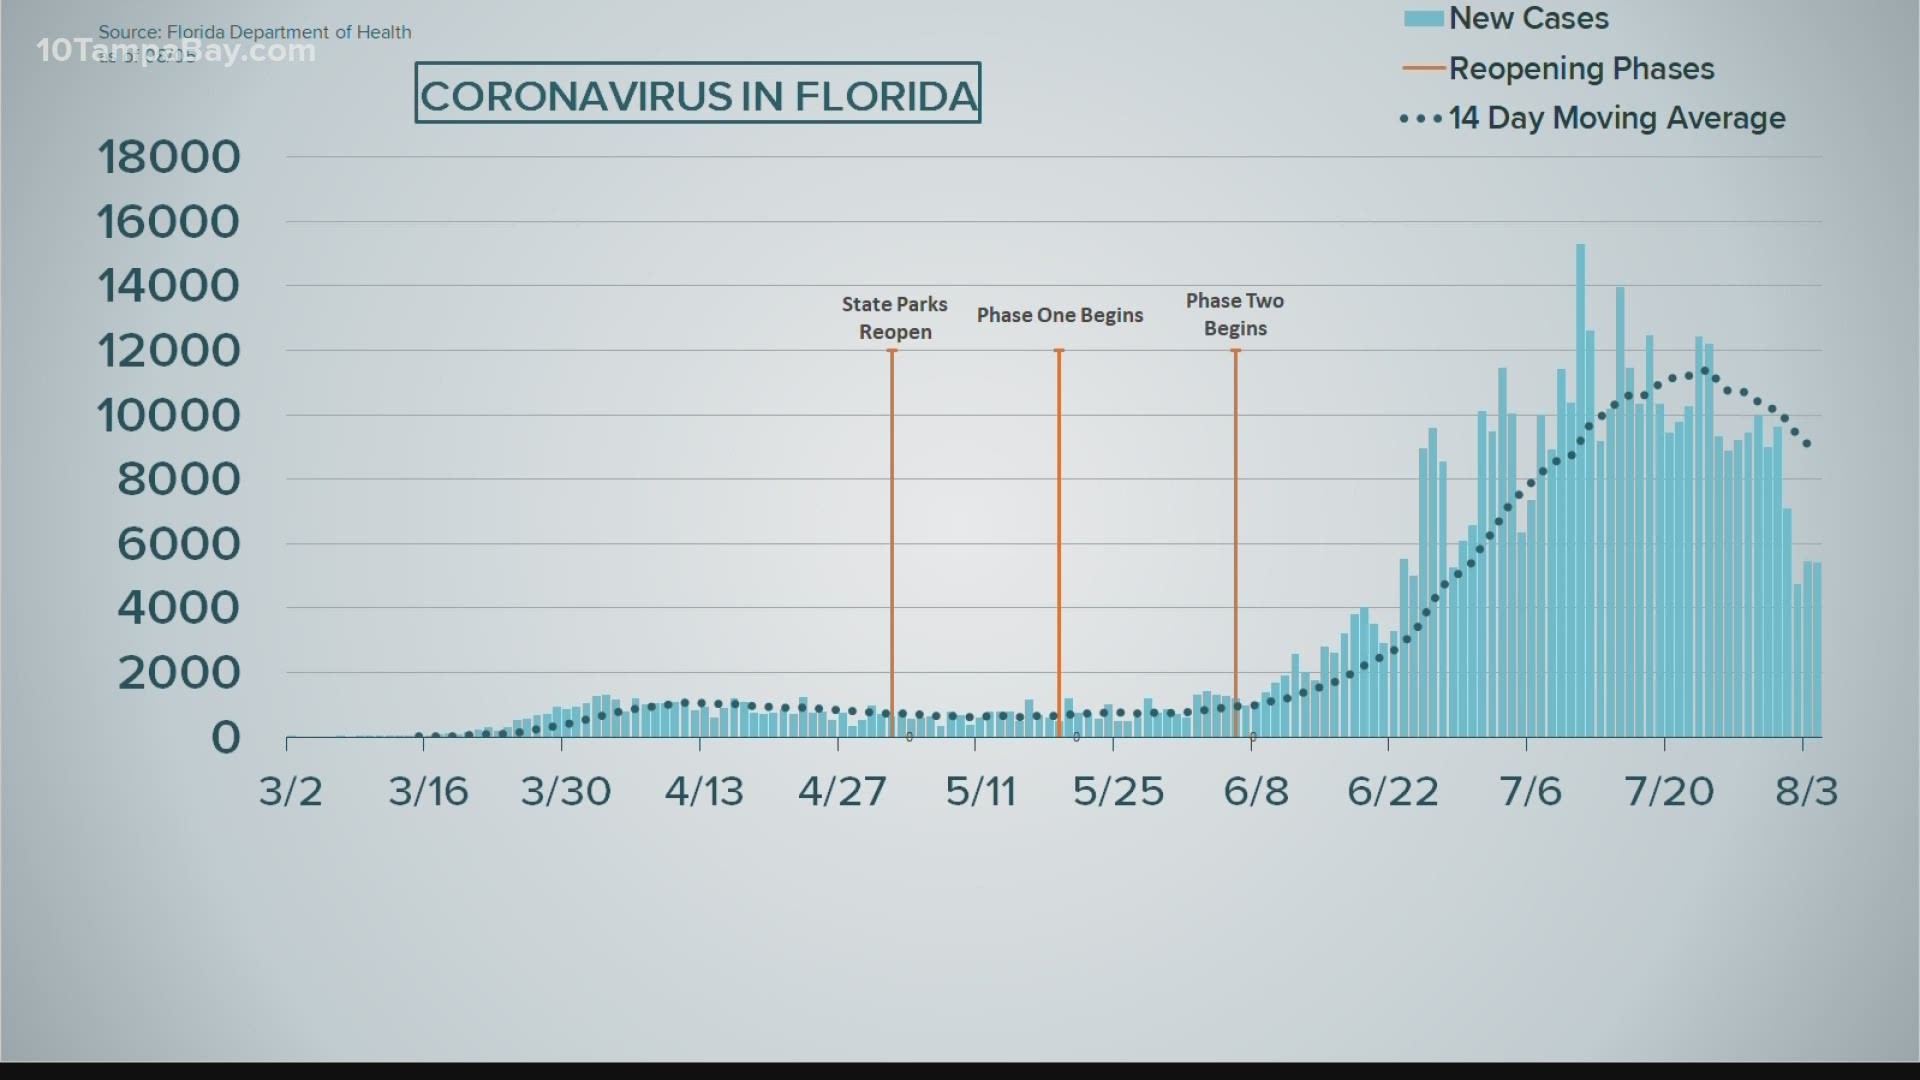 Wednesday's report from the Florida Department of Health showed the state added another 5,409 new coronavirus cases for Aug. 4.